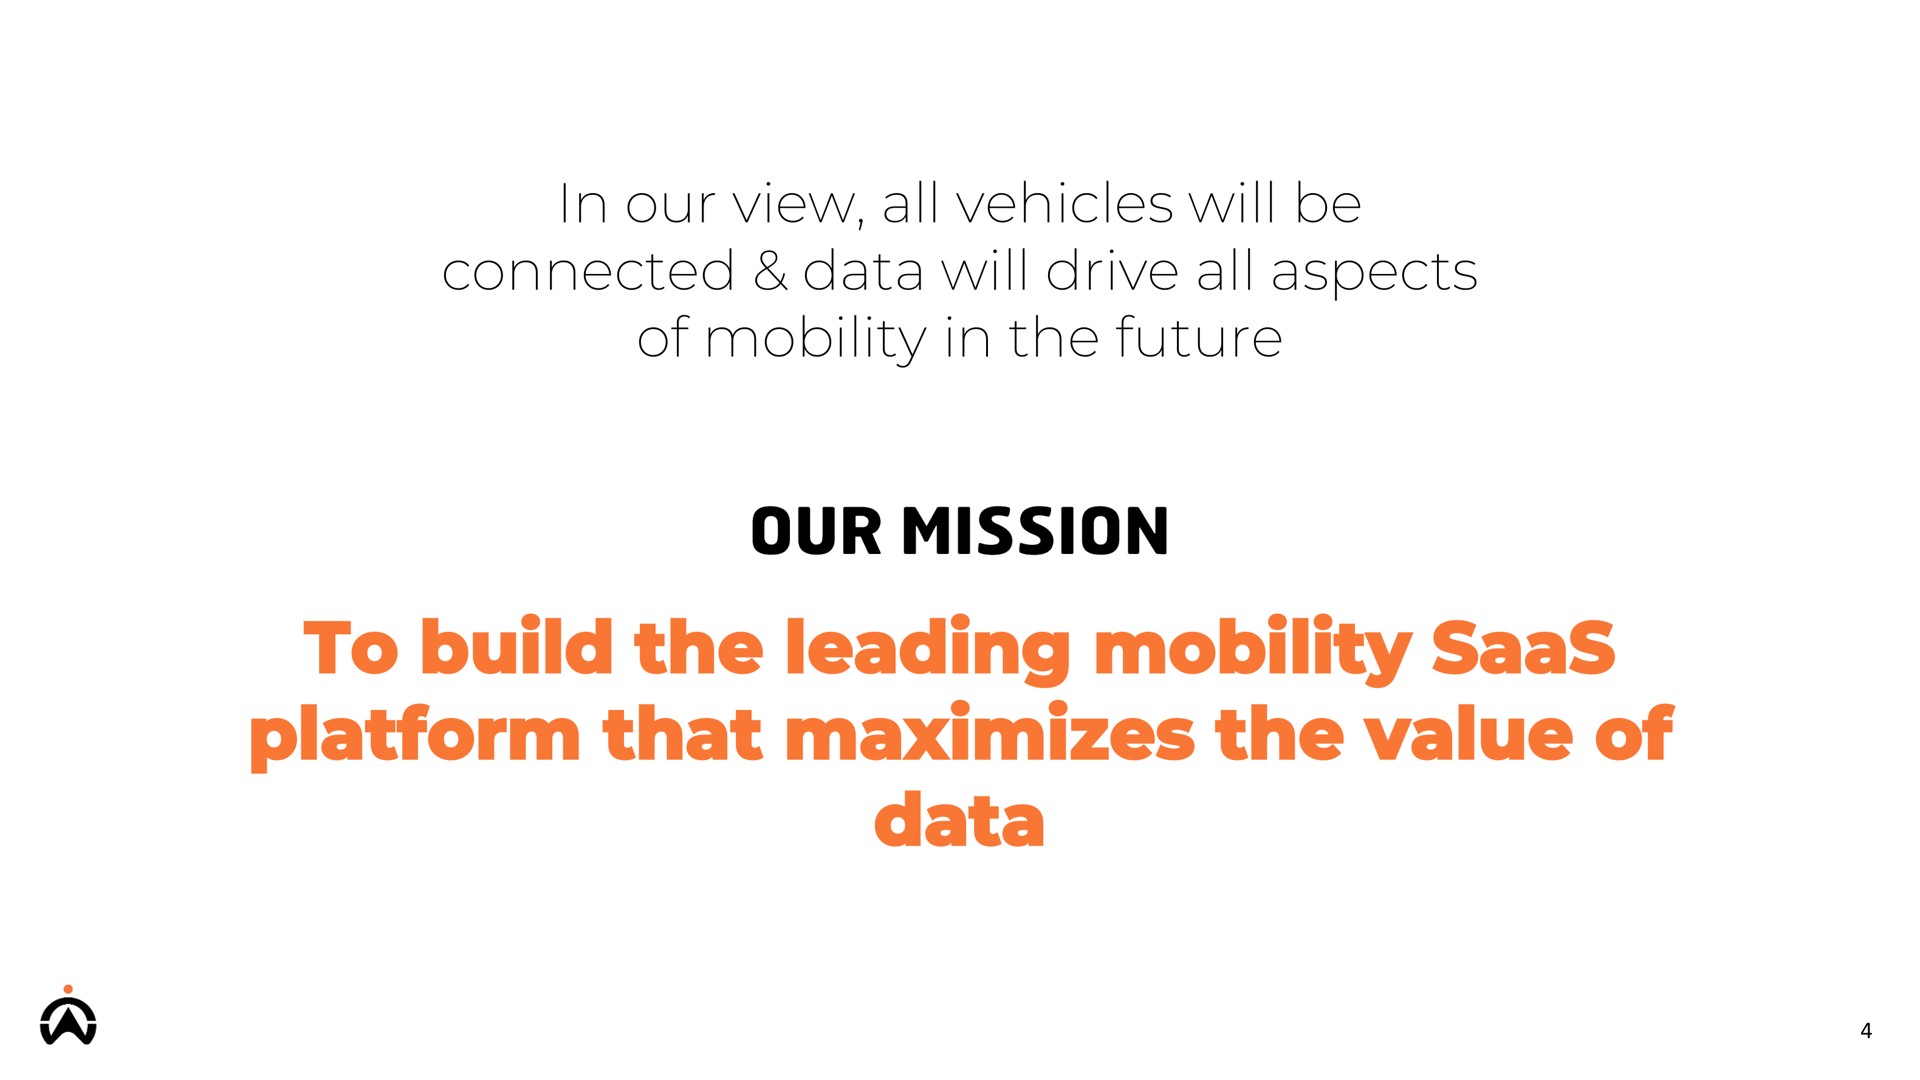 in our view all vehicles will be connected data will drive all aspects of mobility in the future to build the leading mobility platform that maximizes the value of data mission | Karooooo